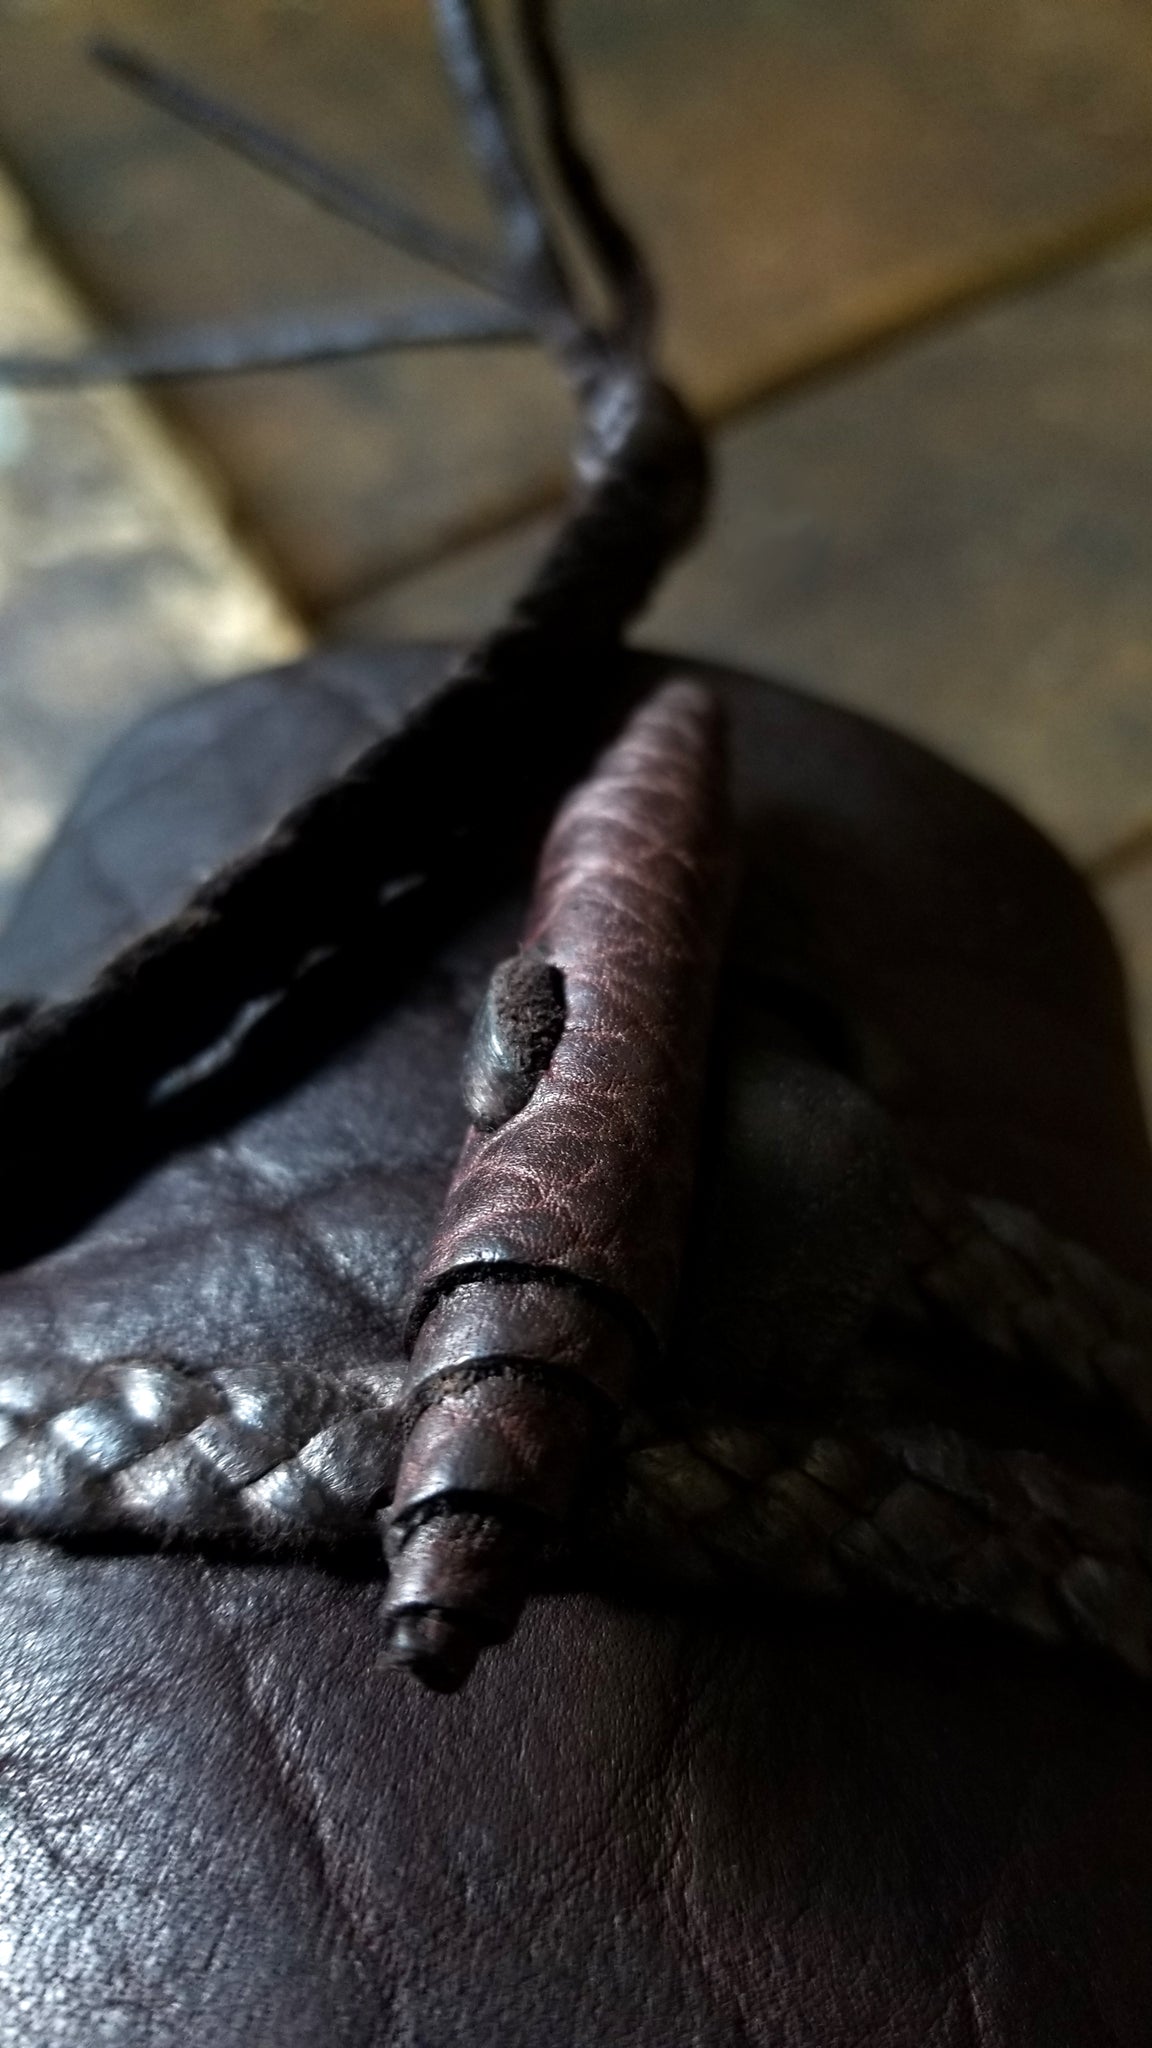 handmade bison leather button on busajja leather wrap cuff, jason momoa bohemian style men's leather cuff